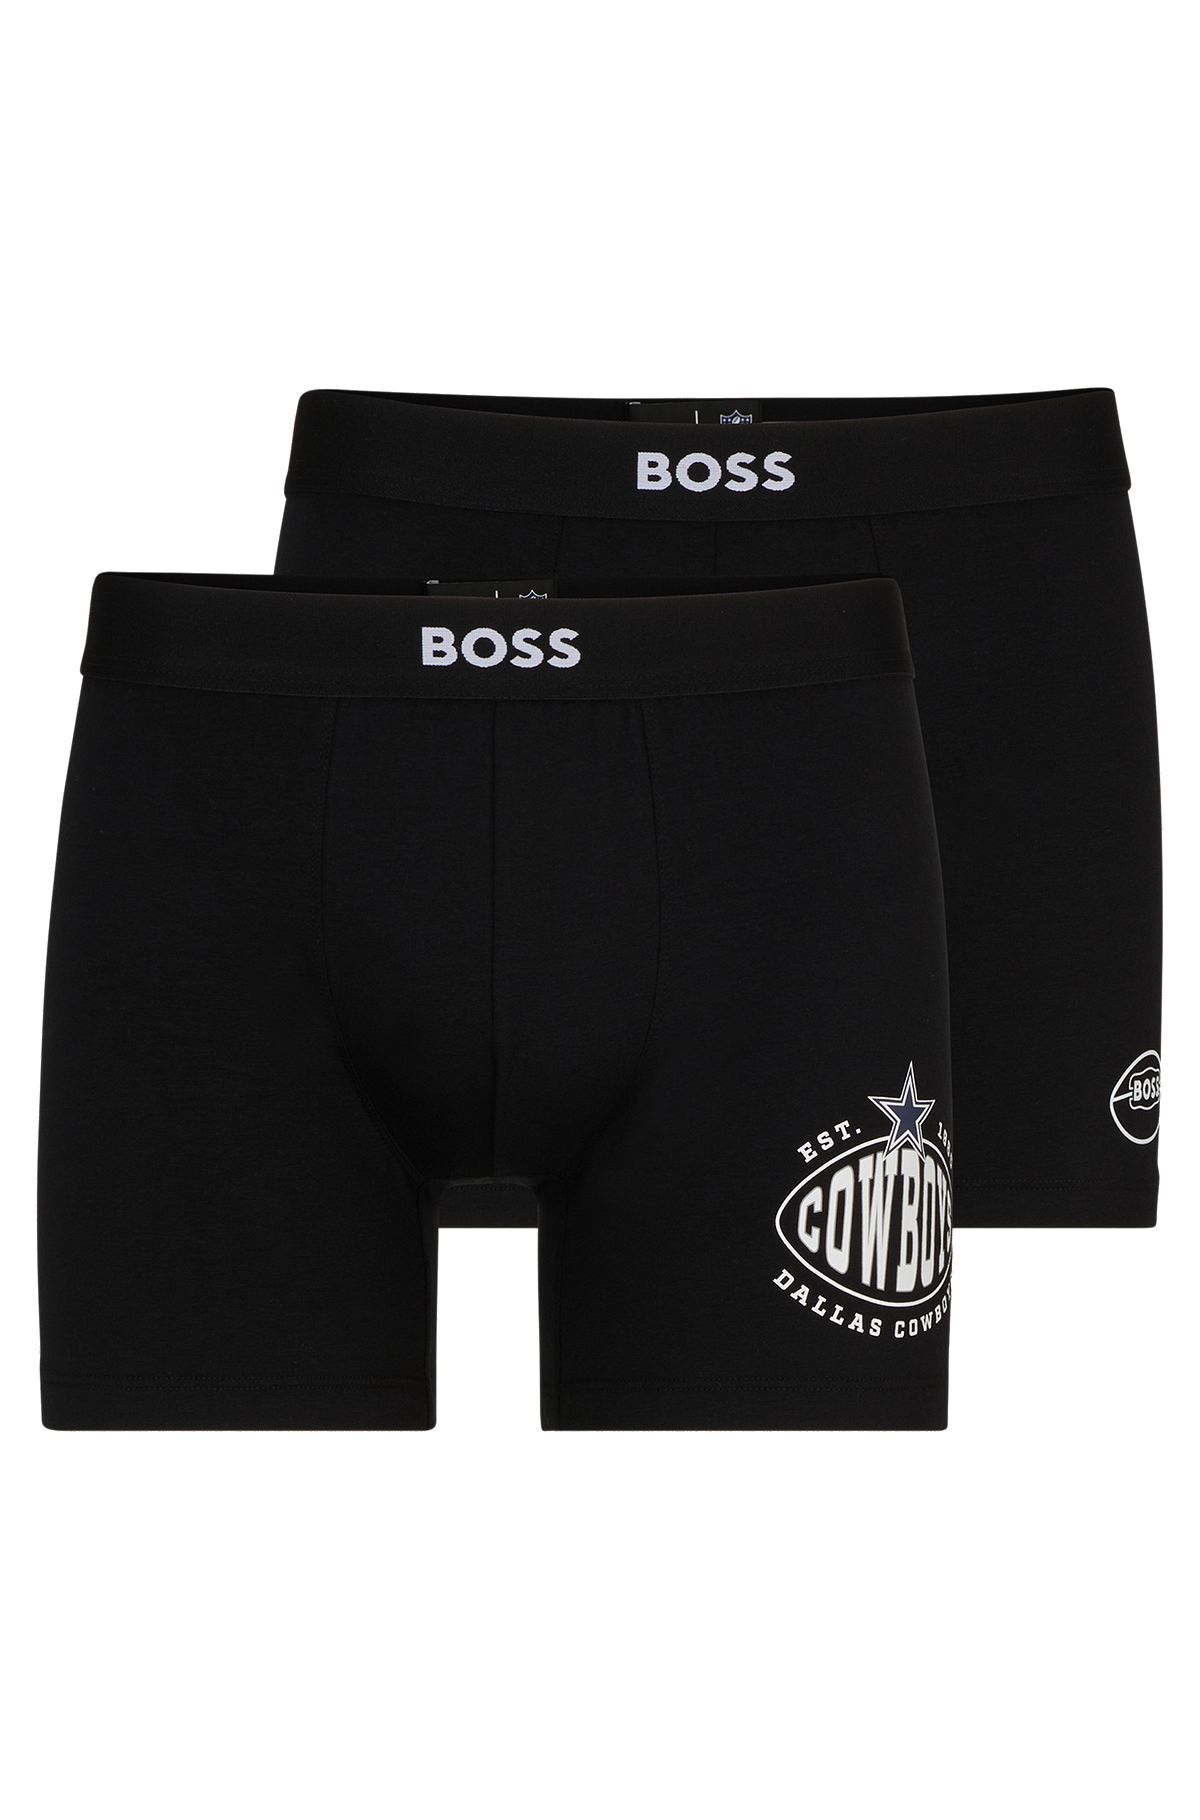 BOSS x NFL two-pack of boxer briefs with collaborative branding, Cowboys